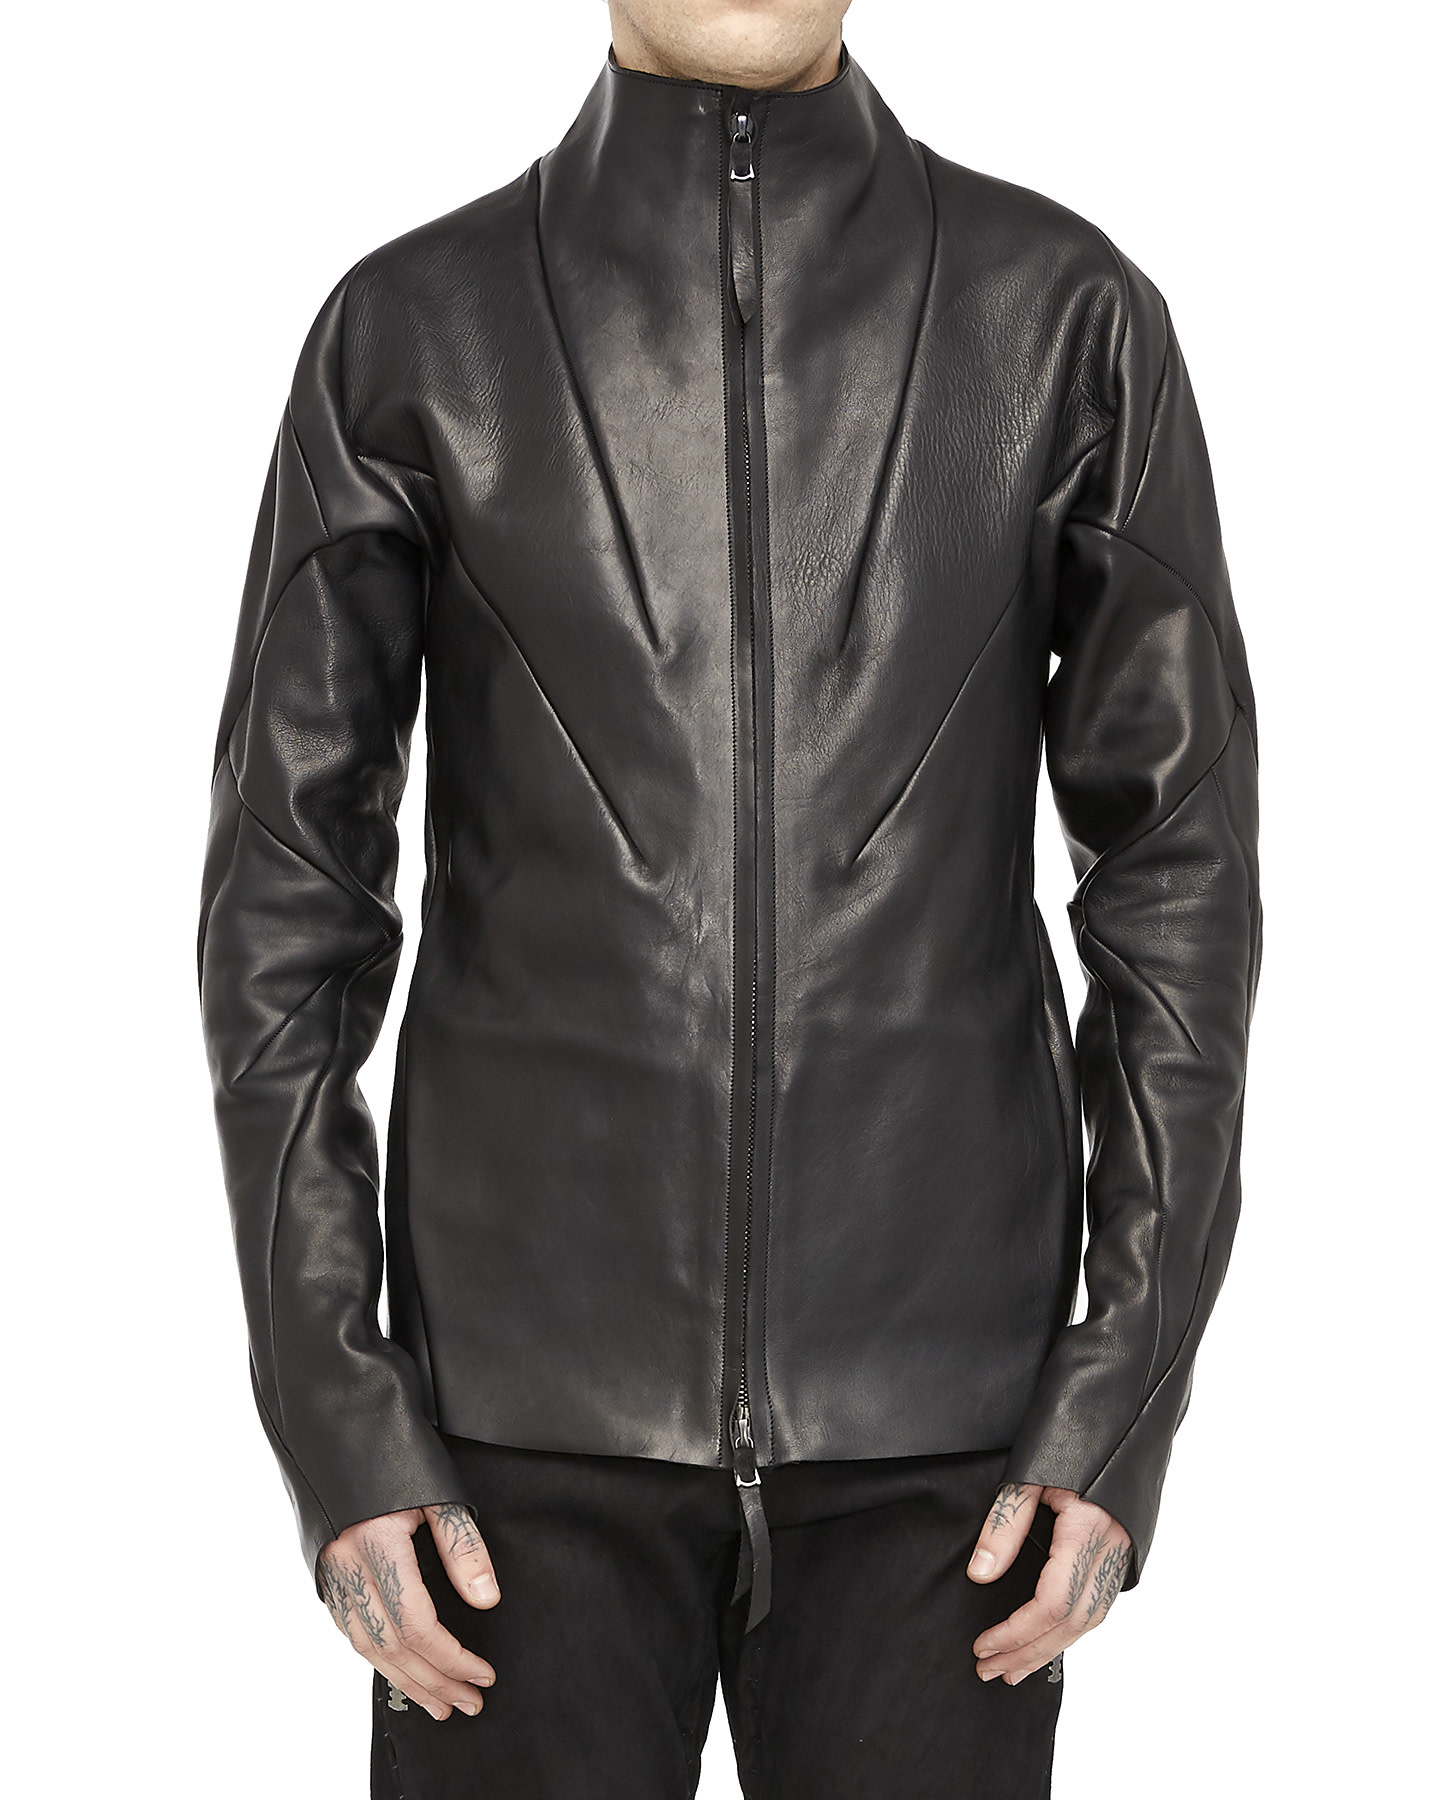 FORCED AVIATOR JACKET - 1.4MM GUIDI HORSE